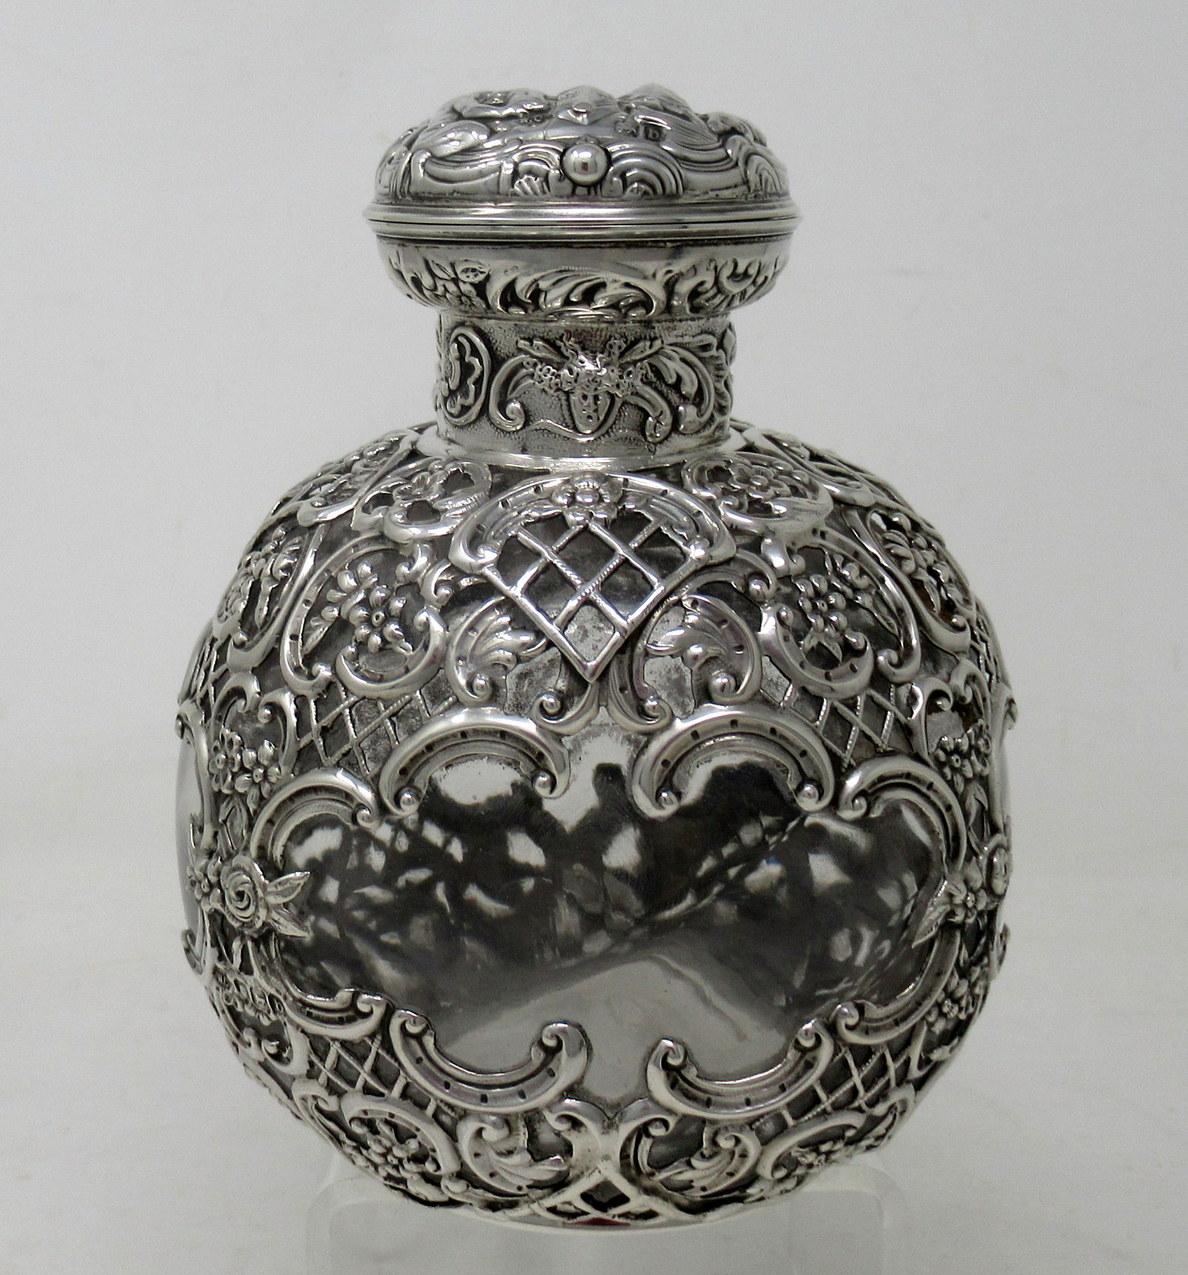 An exceptionally fine quality English full lead crystal and sterling silver ladies scent bottle of exceptionally large proportions and of outstanding quality, 

The silver gilt hinged lid decorated with a raised group of figures above a lavish